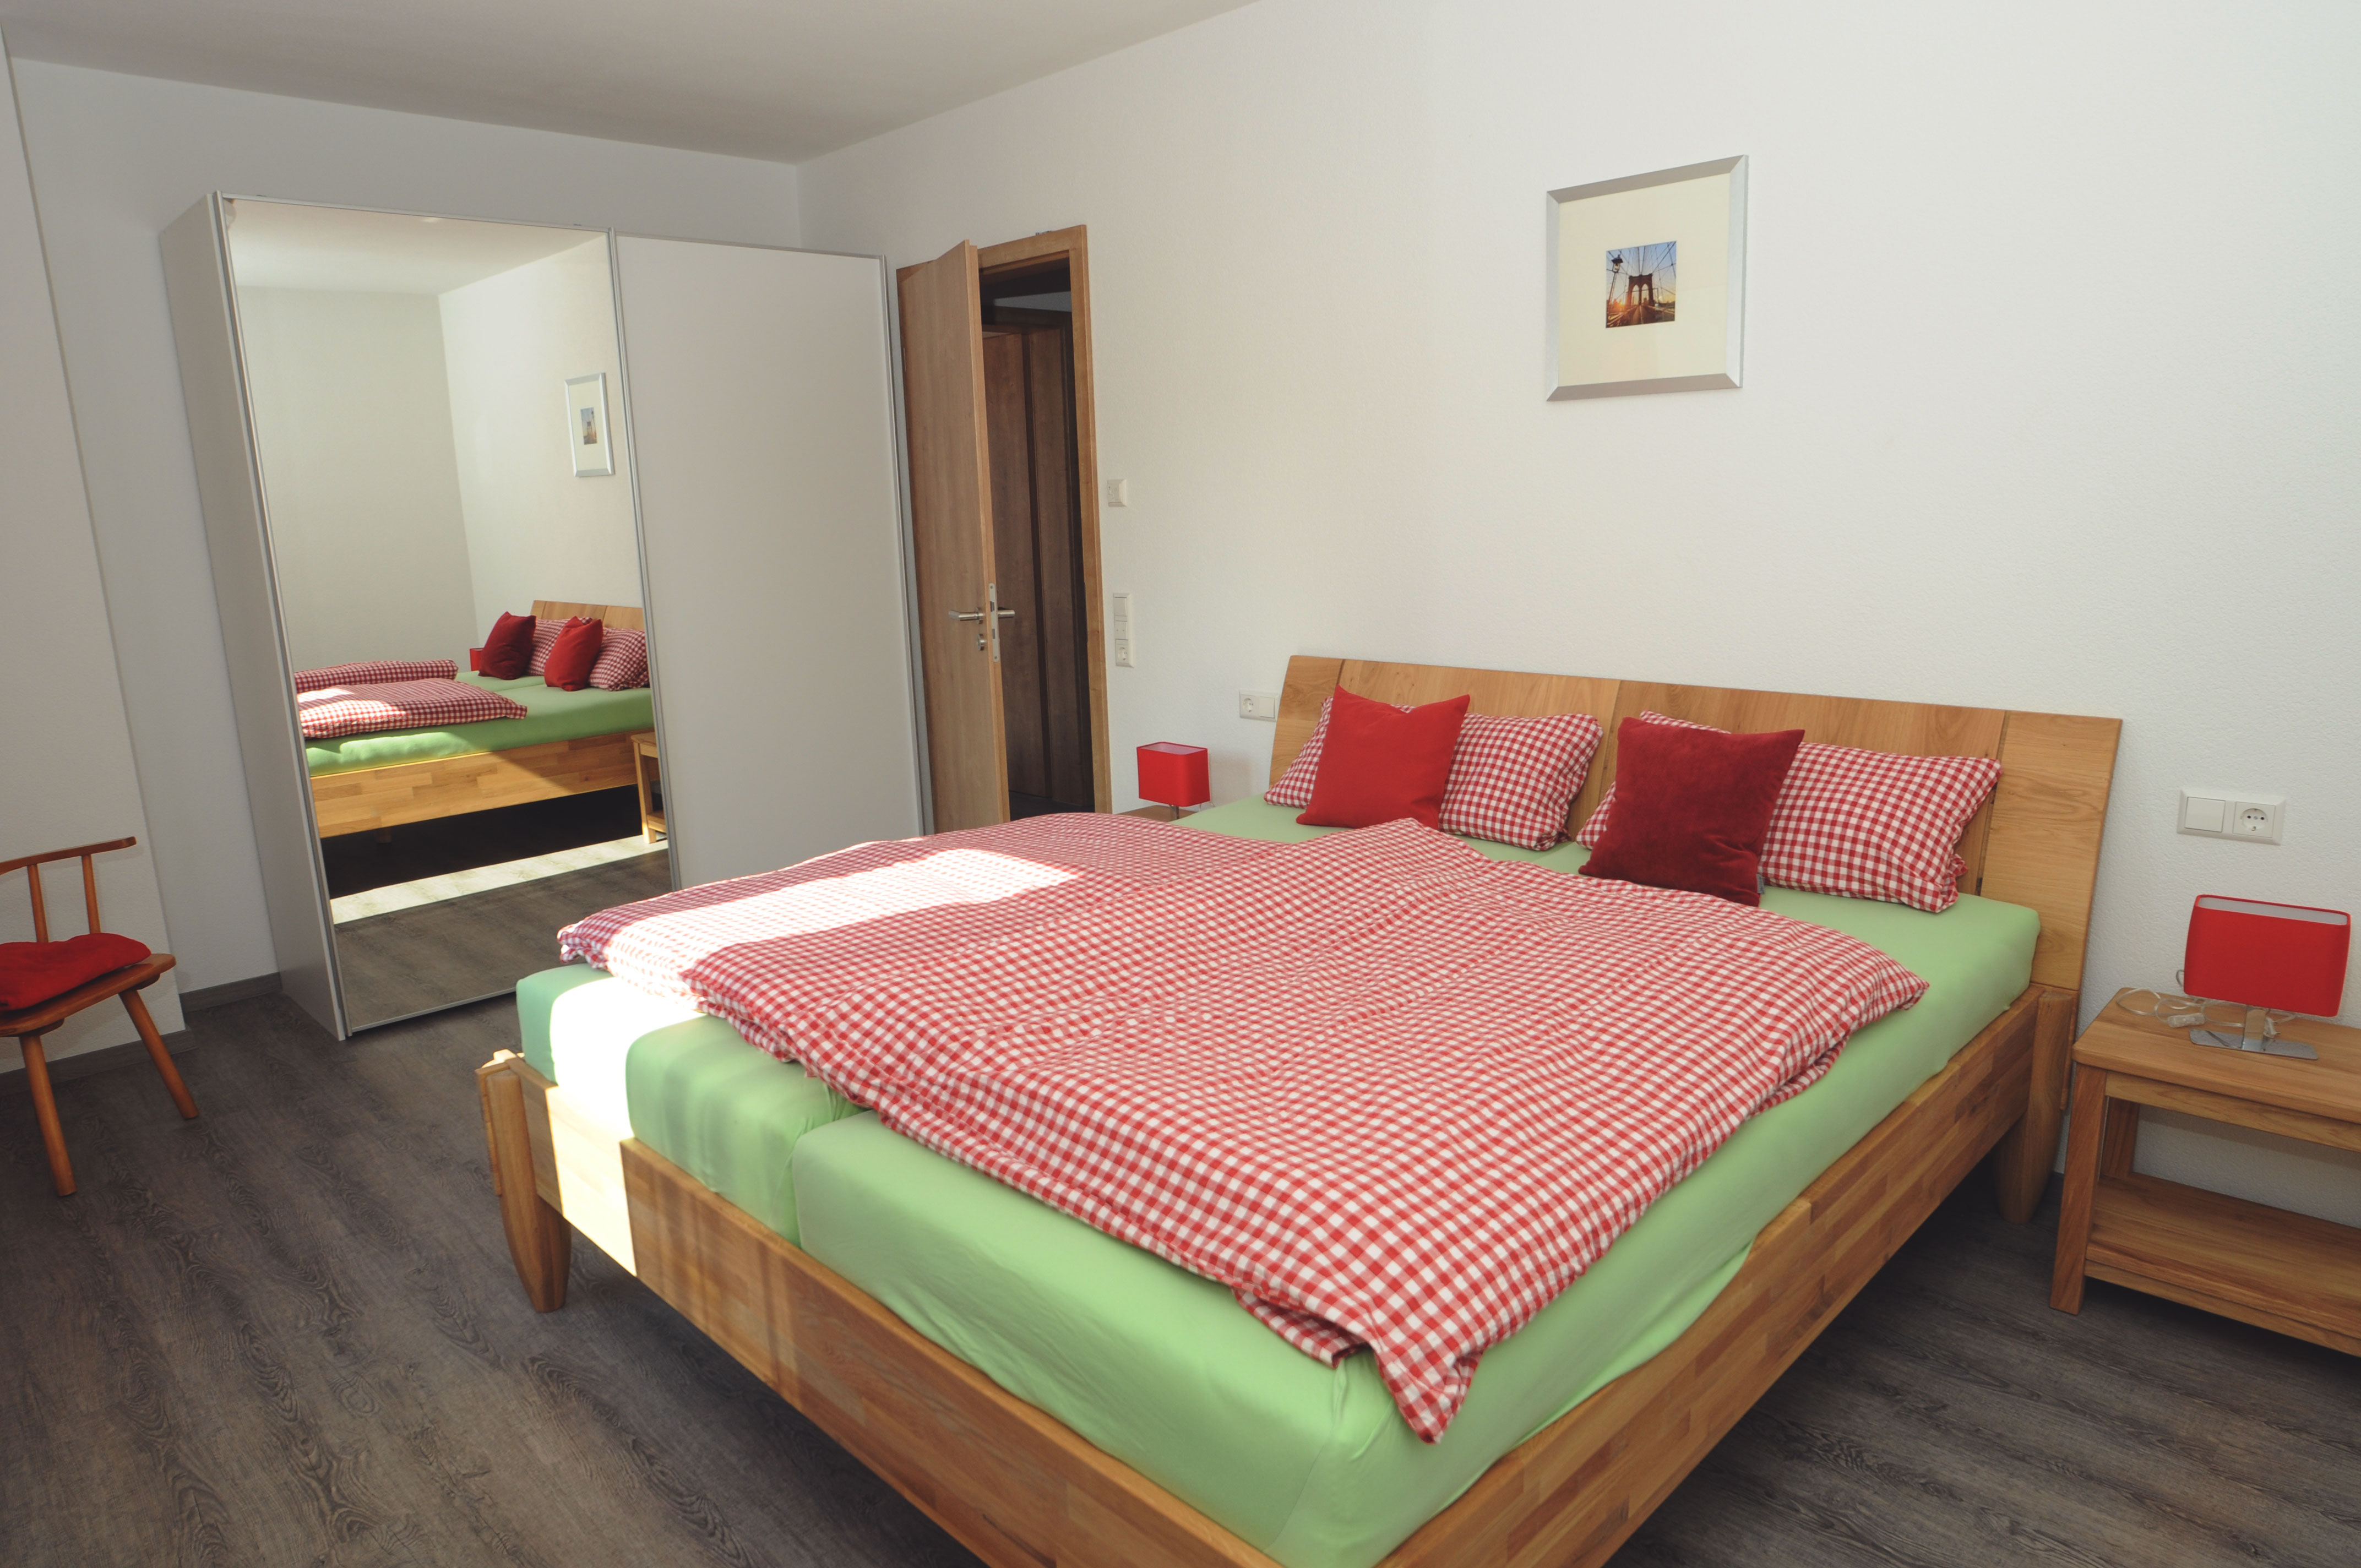 The bedroom with one double bed